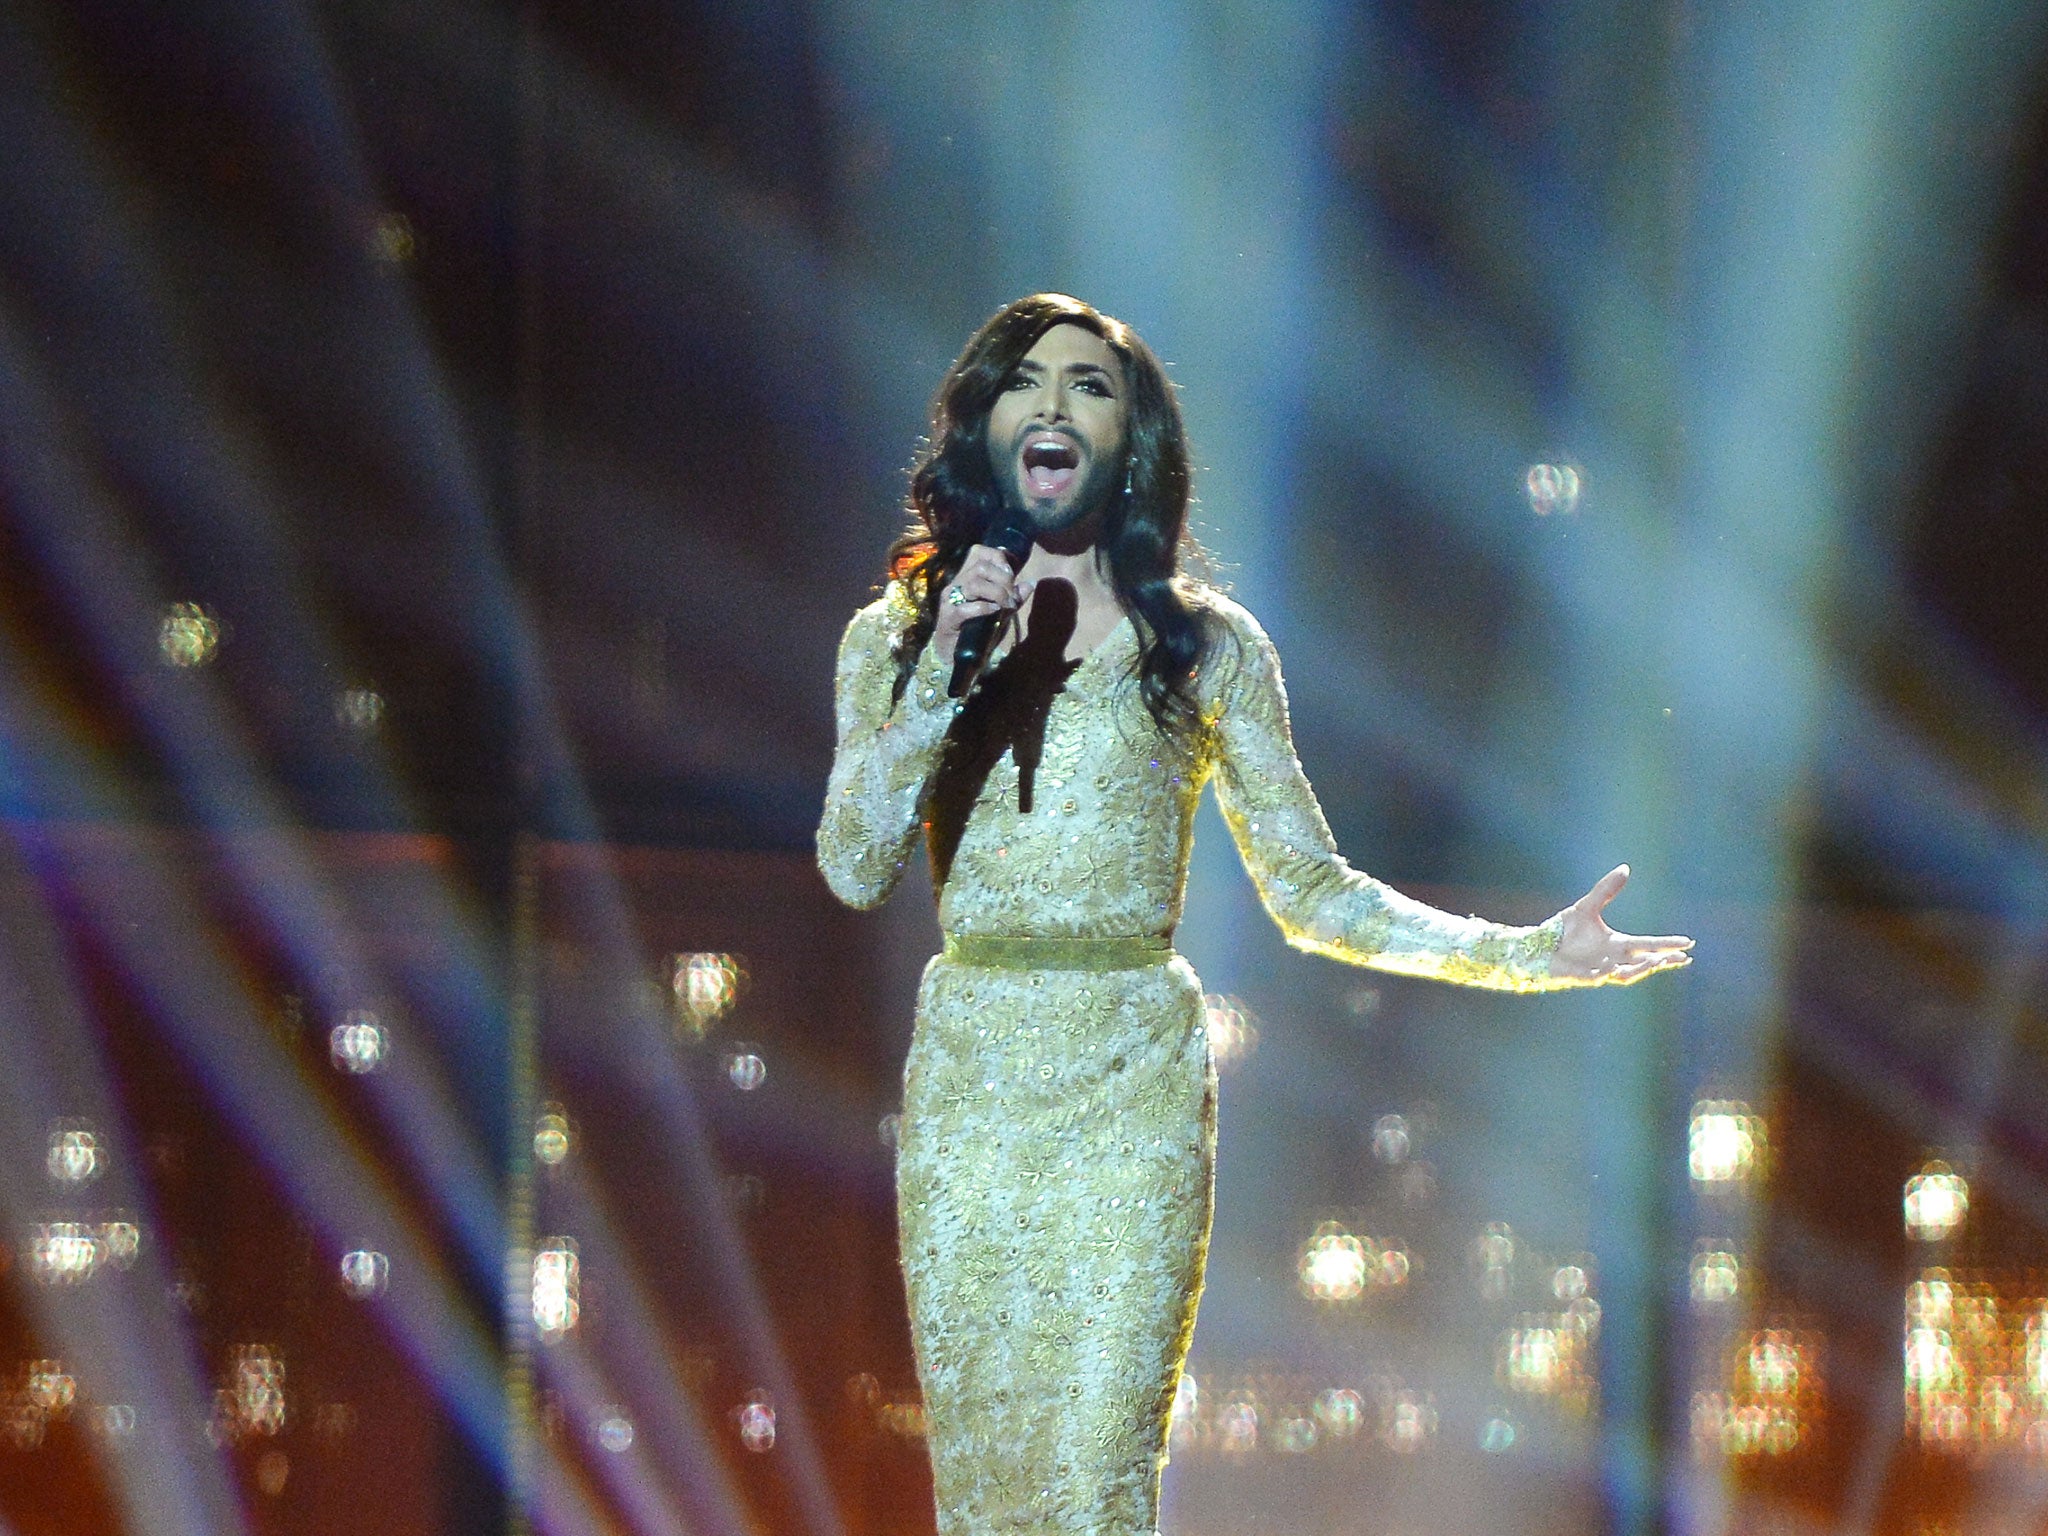 Conchita Wurst of Austria performs at the dress rehearsal of the Second Semi-Final of the Eurovision Song Contest 2014